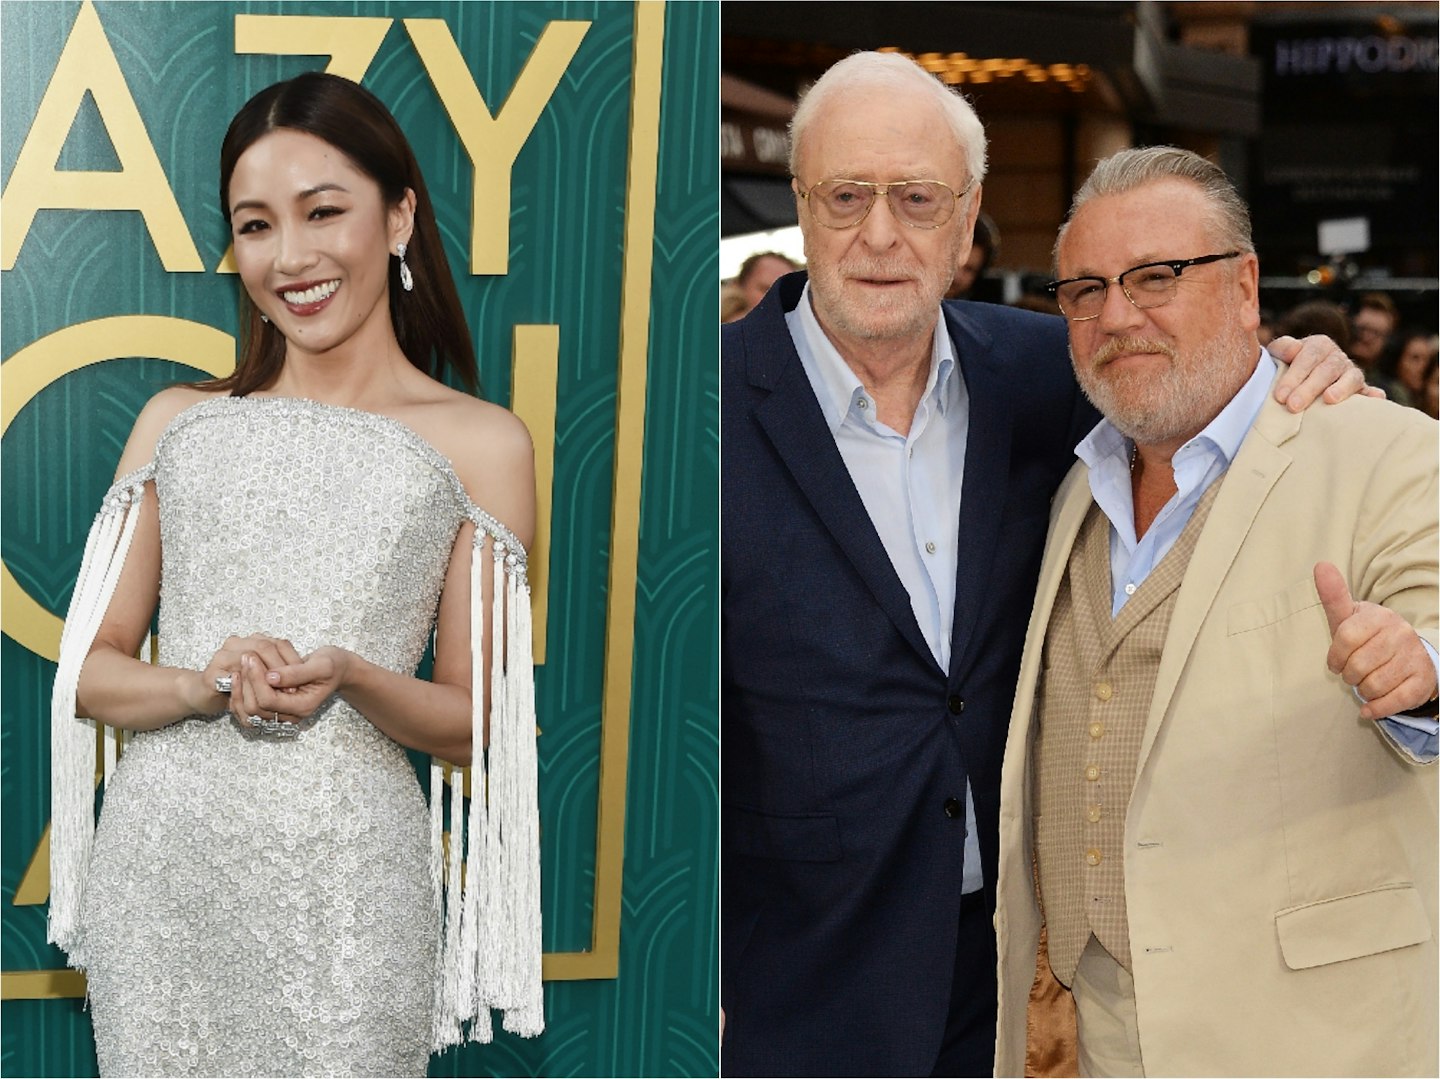 Constance Wu, Michael Caine and Ray Winstone